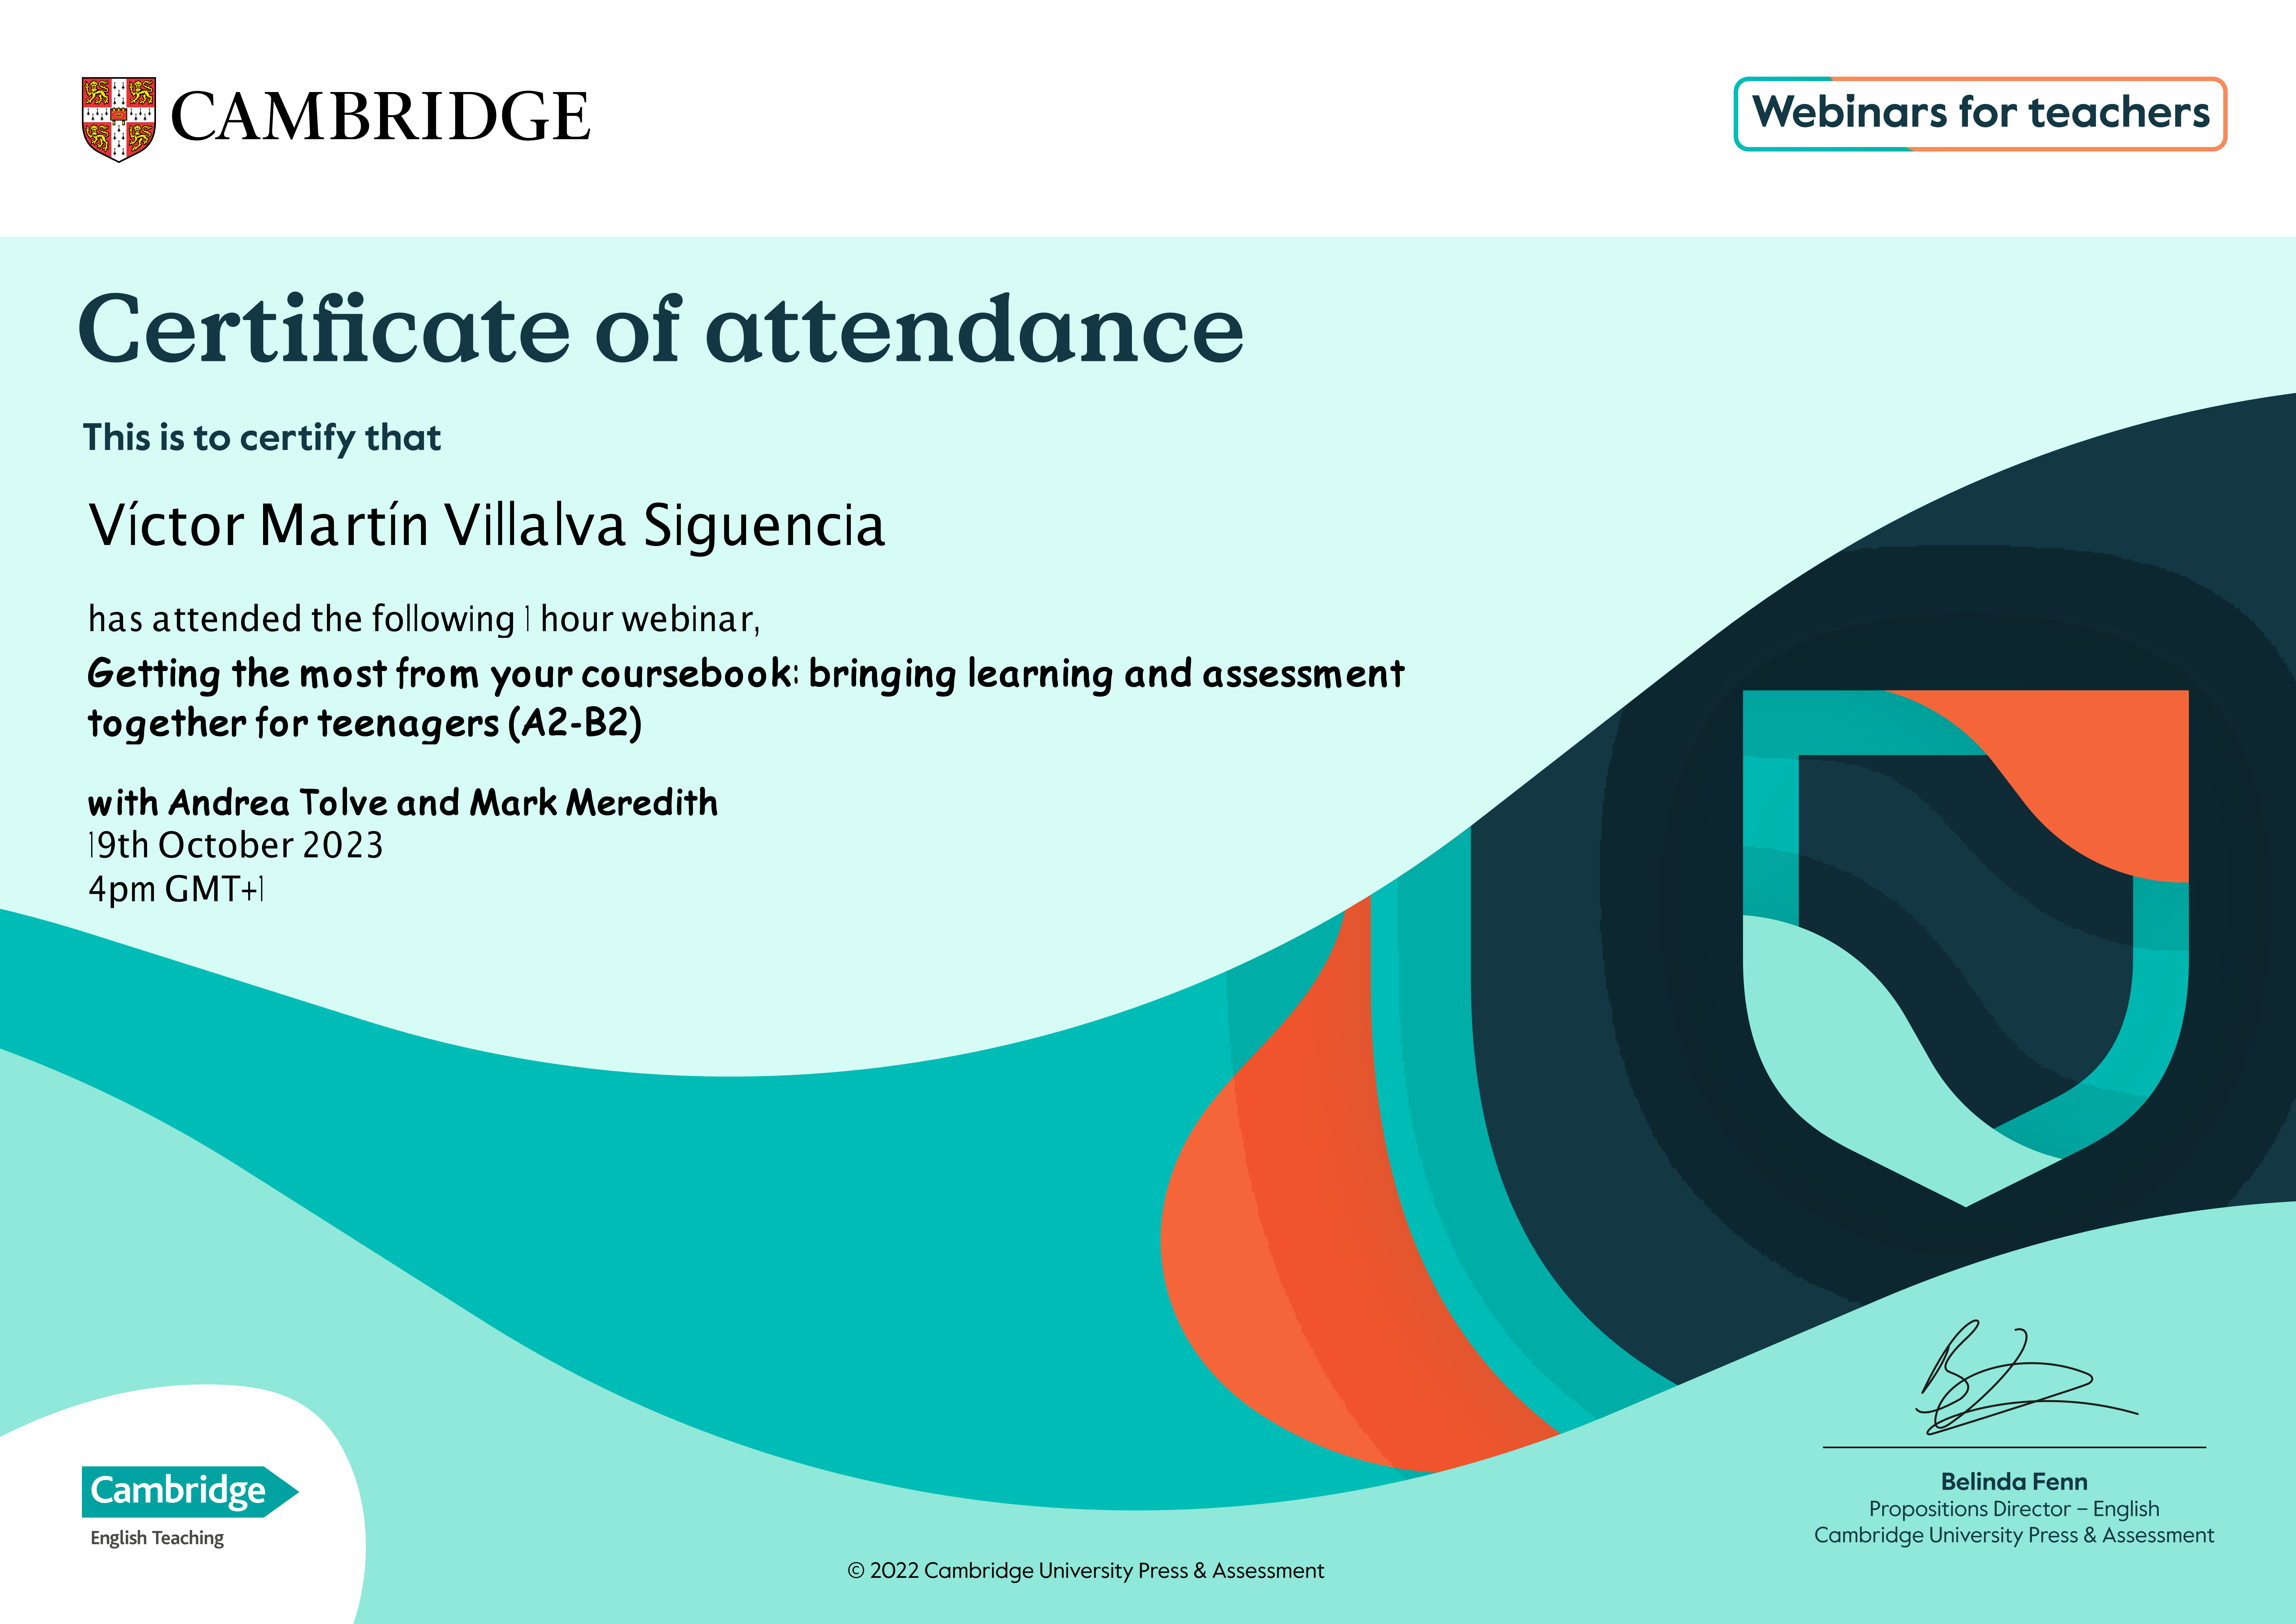 Ta CAMBRIDGE | Webinars for teachers

Certificate of attendance

This is to certify that

  
  
 
 
  
 
     
   

Victor Martin Villalva Siguencia

has attended the following | hour webinar,

Getting the most from your coursebook: bringing learning and assessment
together for teenagers (A2-B2)

with Andrea Tolve and Mark Meredith
19th October 2023
4pm GMT+]

=

Belinda Fenn
Propositions Director — English
Cambridge University Press &amp; Assessment

   

Cambridge

English Teaching
© 2022 Cambridge University Press &amp; Assessment